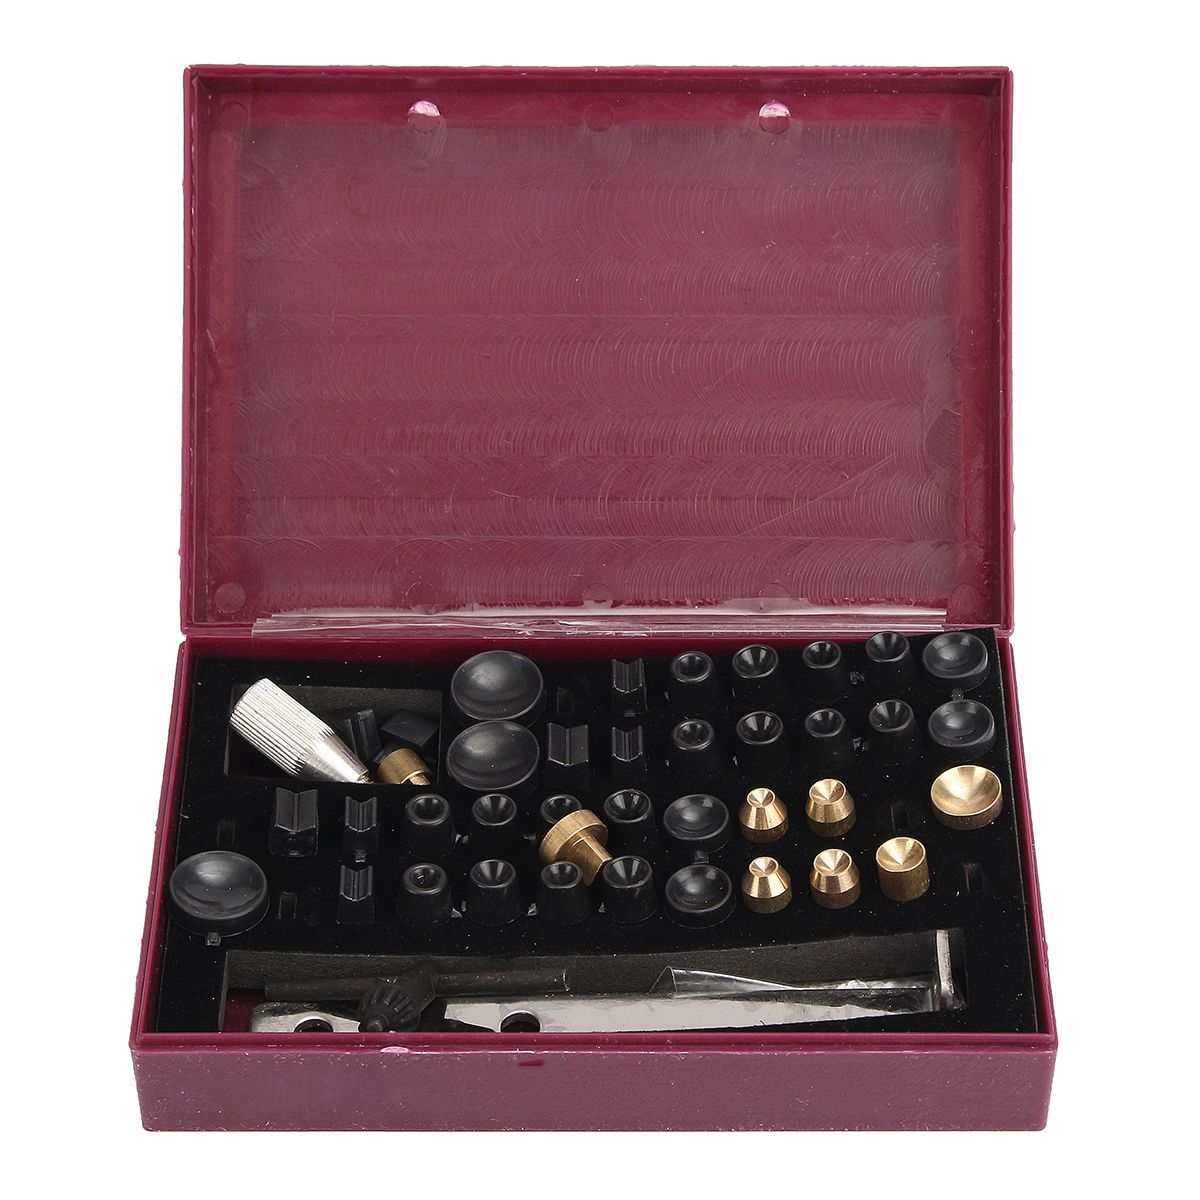 Raitooltrade-110V-320W-Pearl-Drilling-Holing-Machine-Driller-Set-Beads-Making-ewelry-Punch-Tool-Lath-1144534